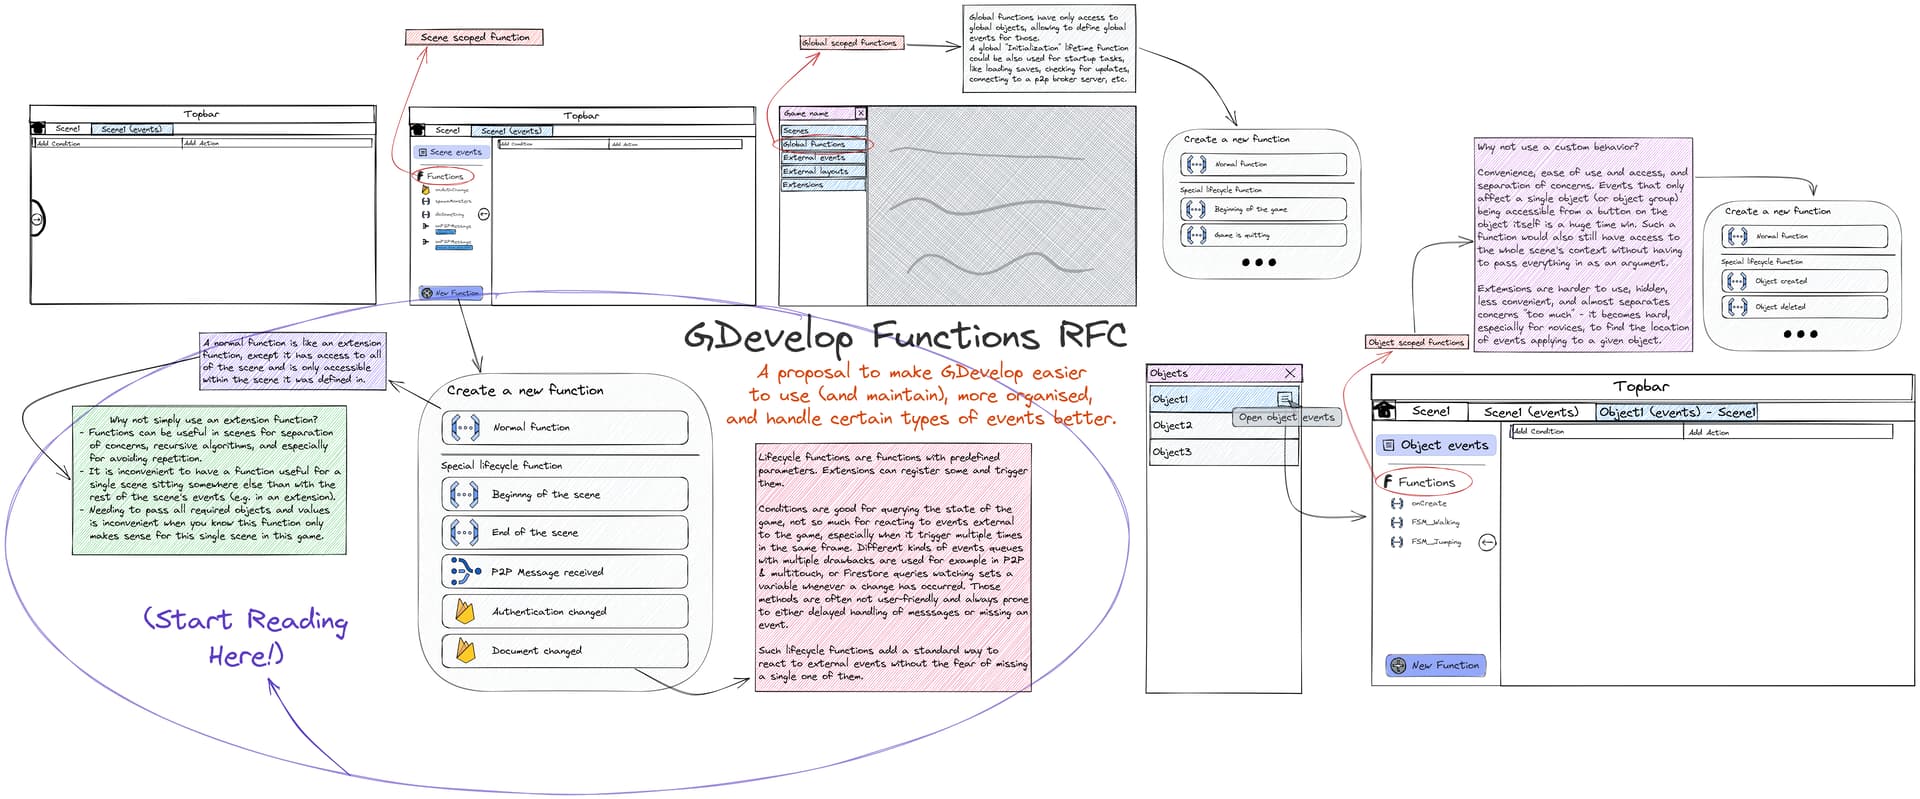 Graphical representation of the RFC, through a mix of text blocks and mockups drawings.